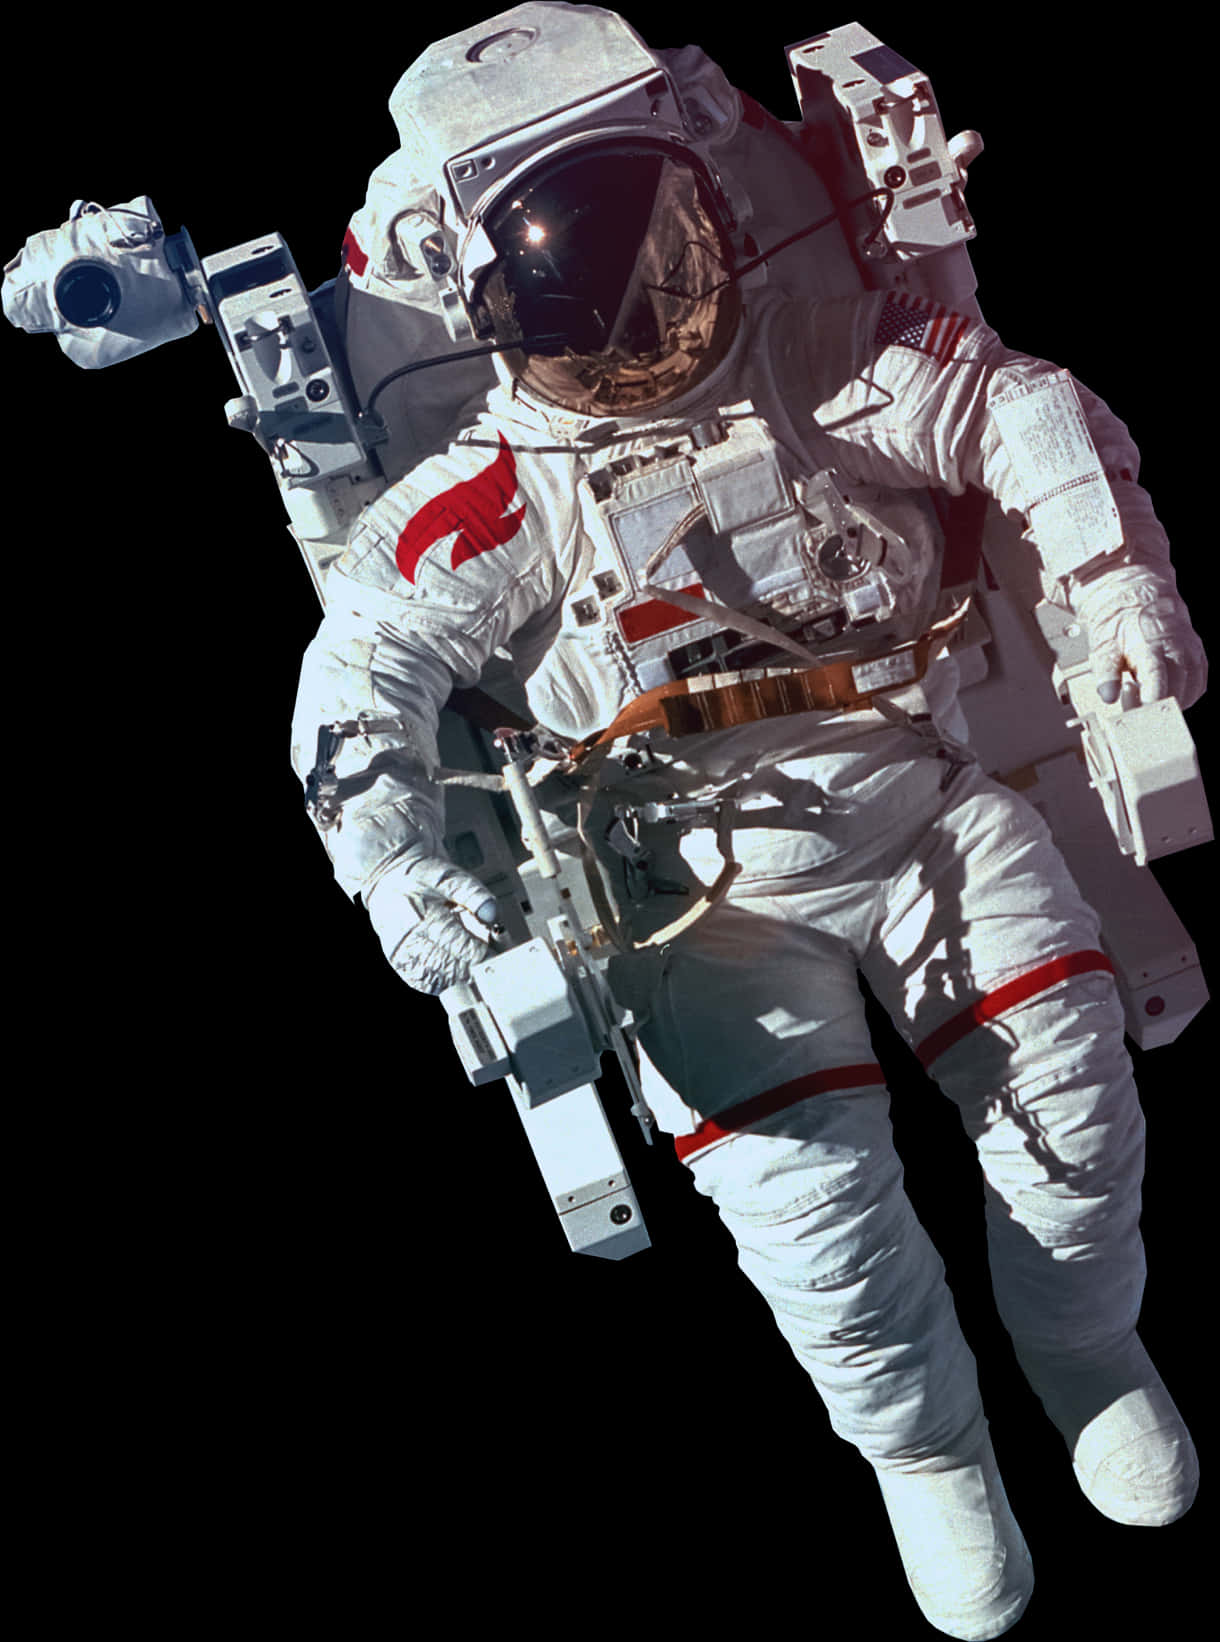 An Astronaut In Space Suit